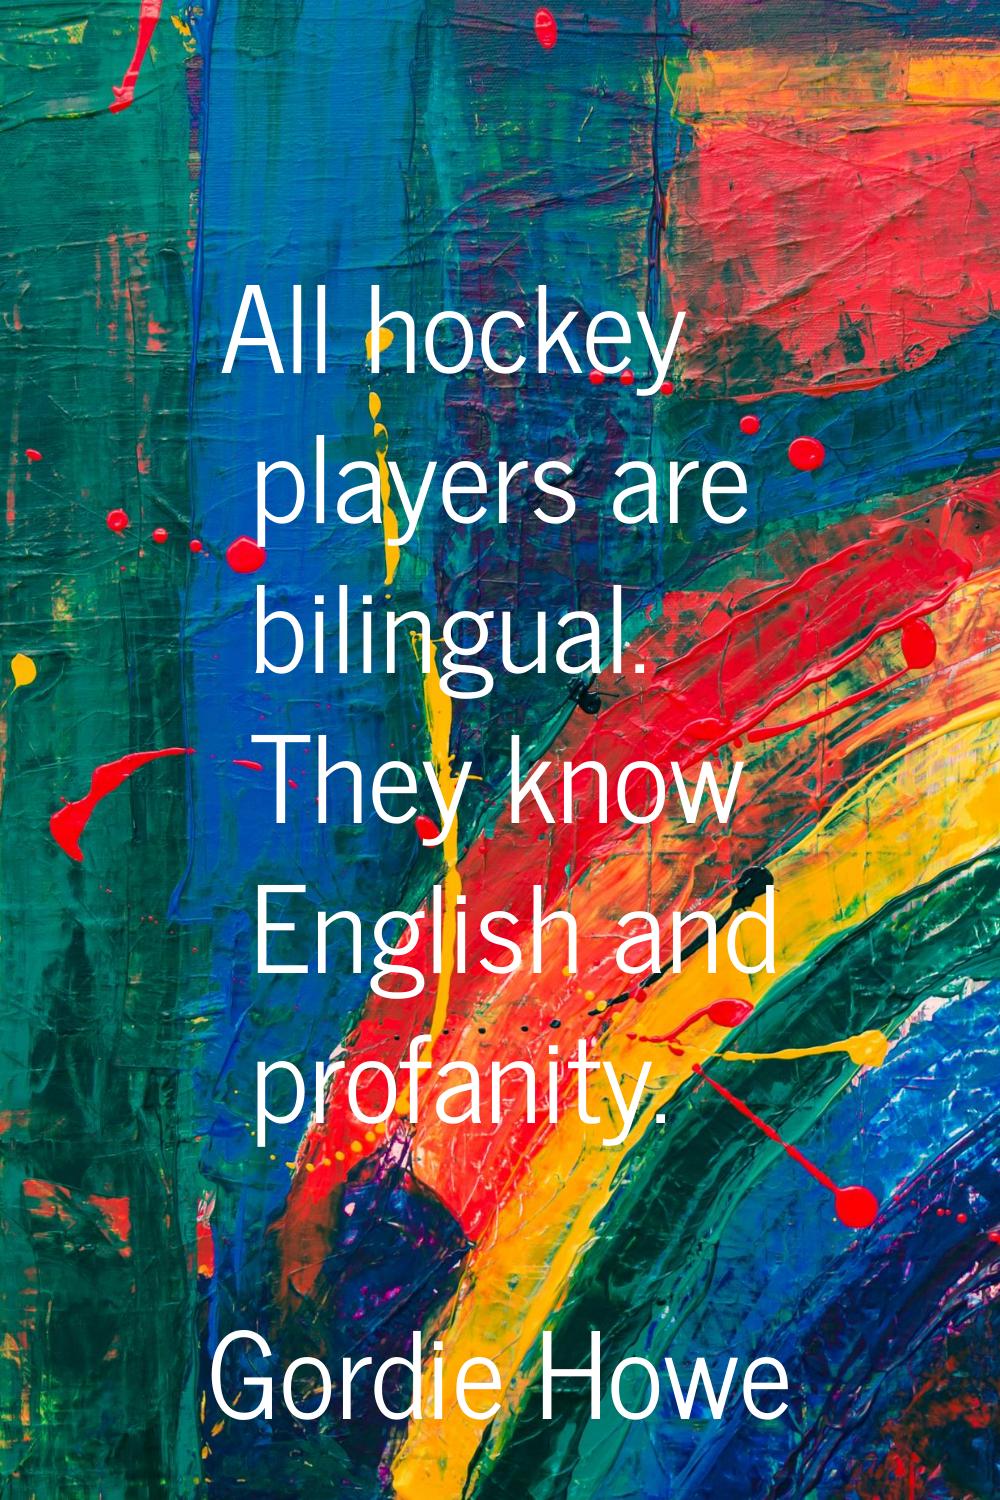 All hockey players are bilingual. They know English and profanity.